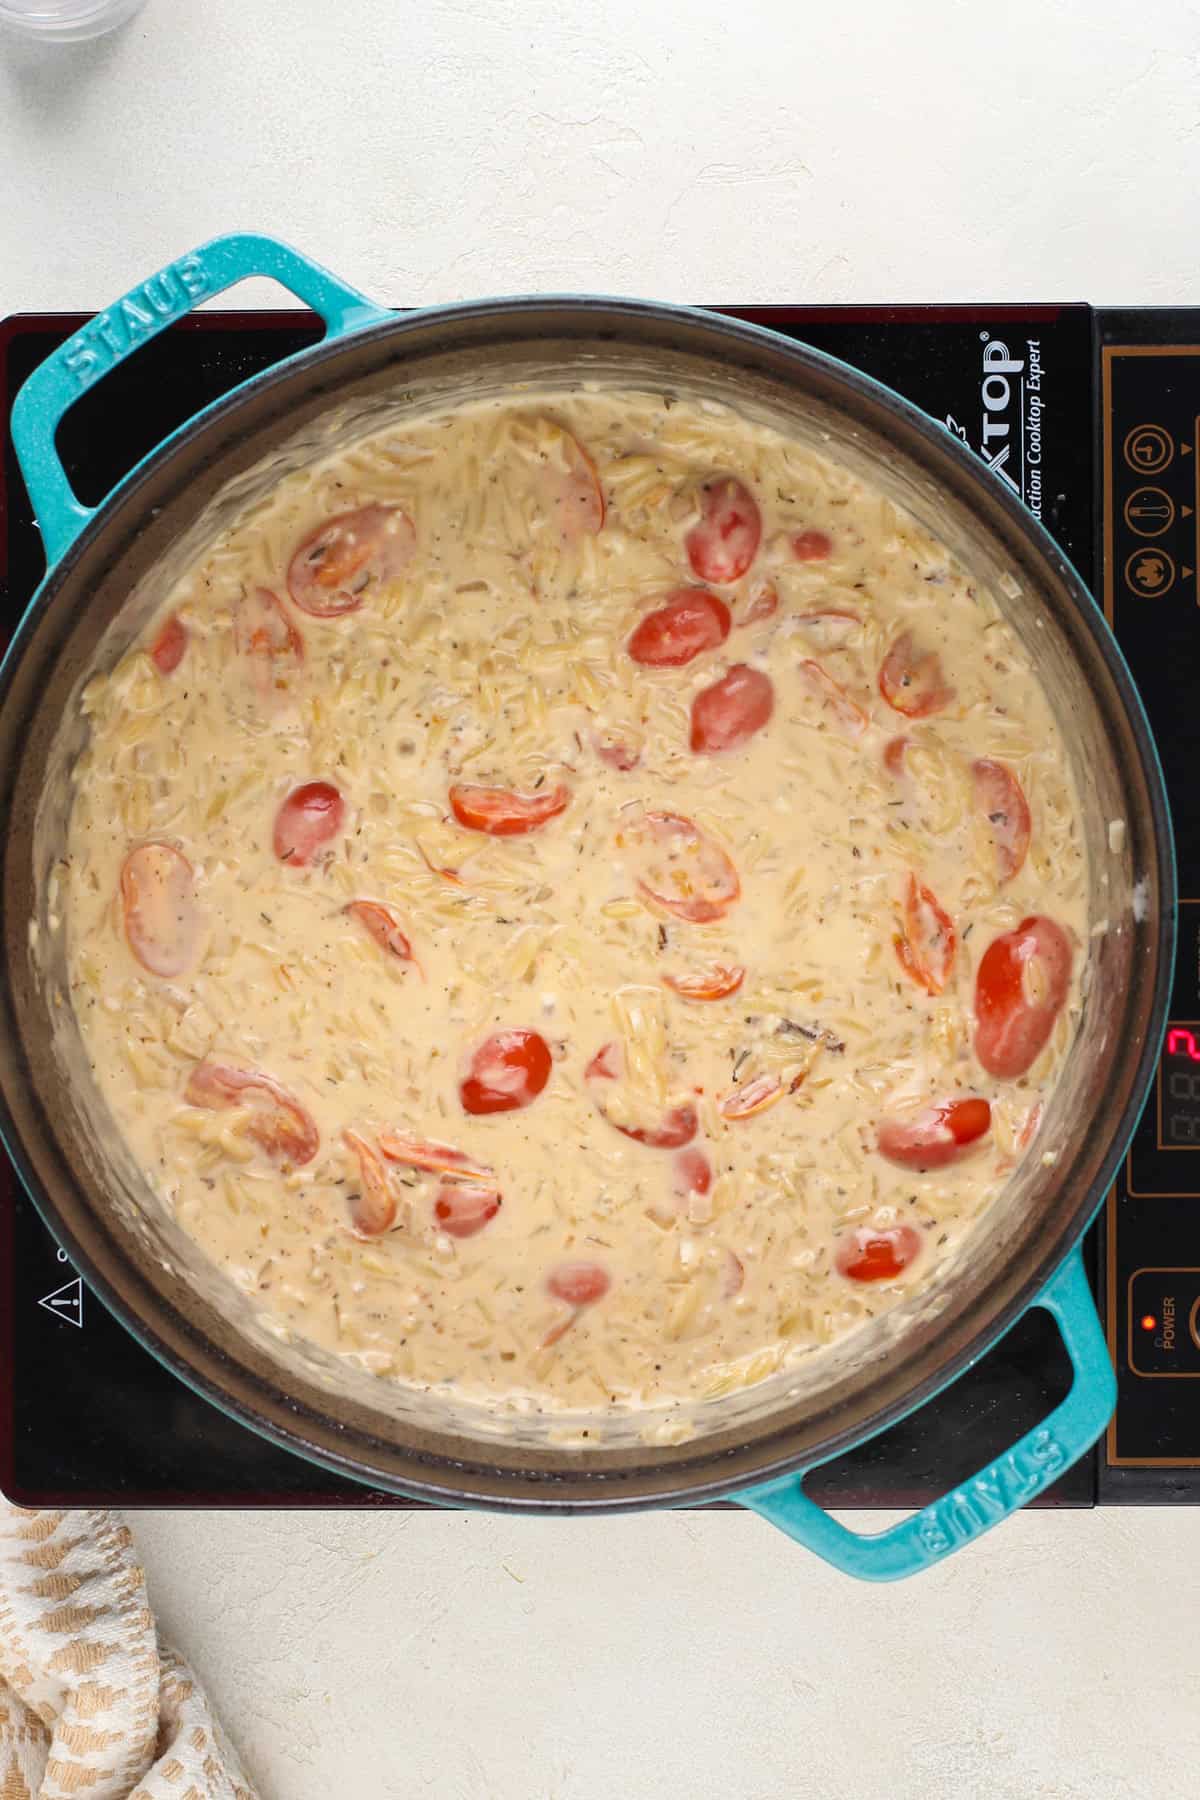 Cooked orzo and cherry tomatoes in a cream sauce in a dutch oven.